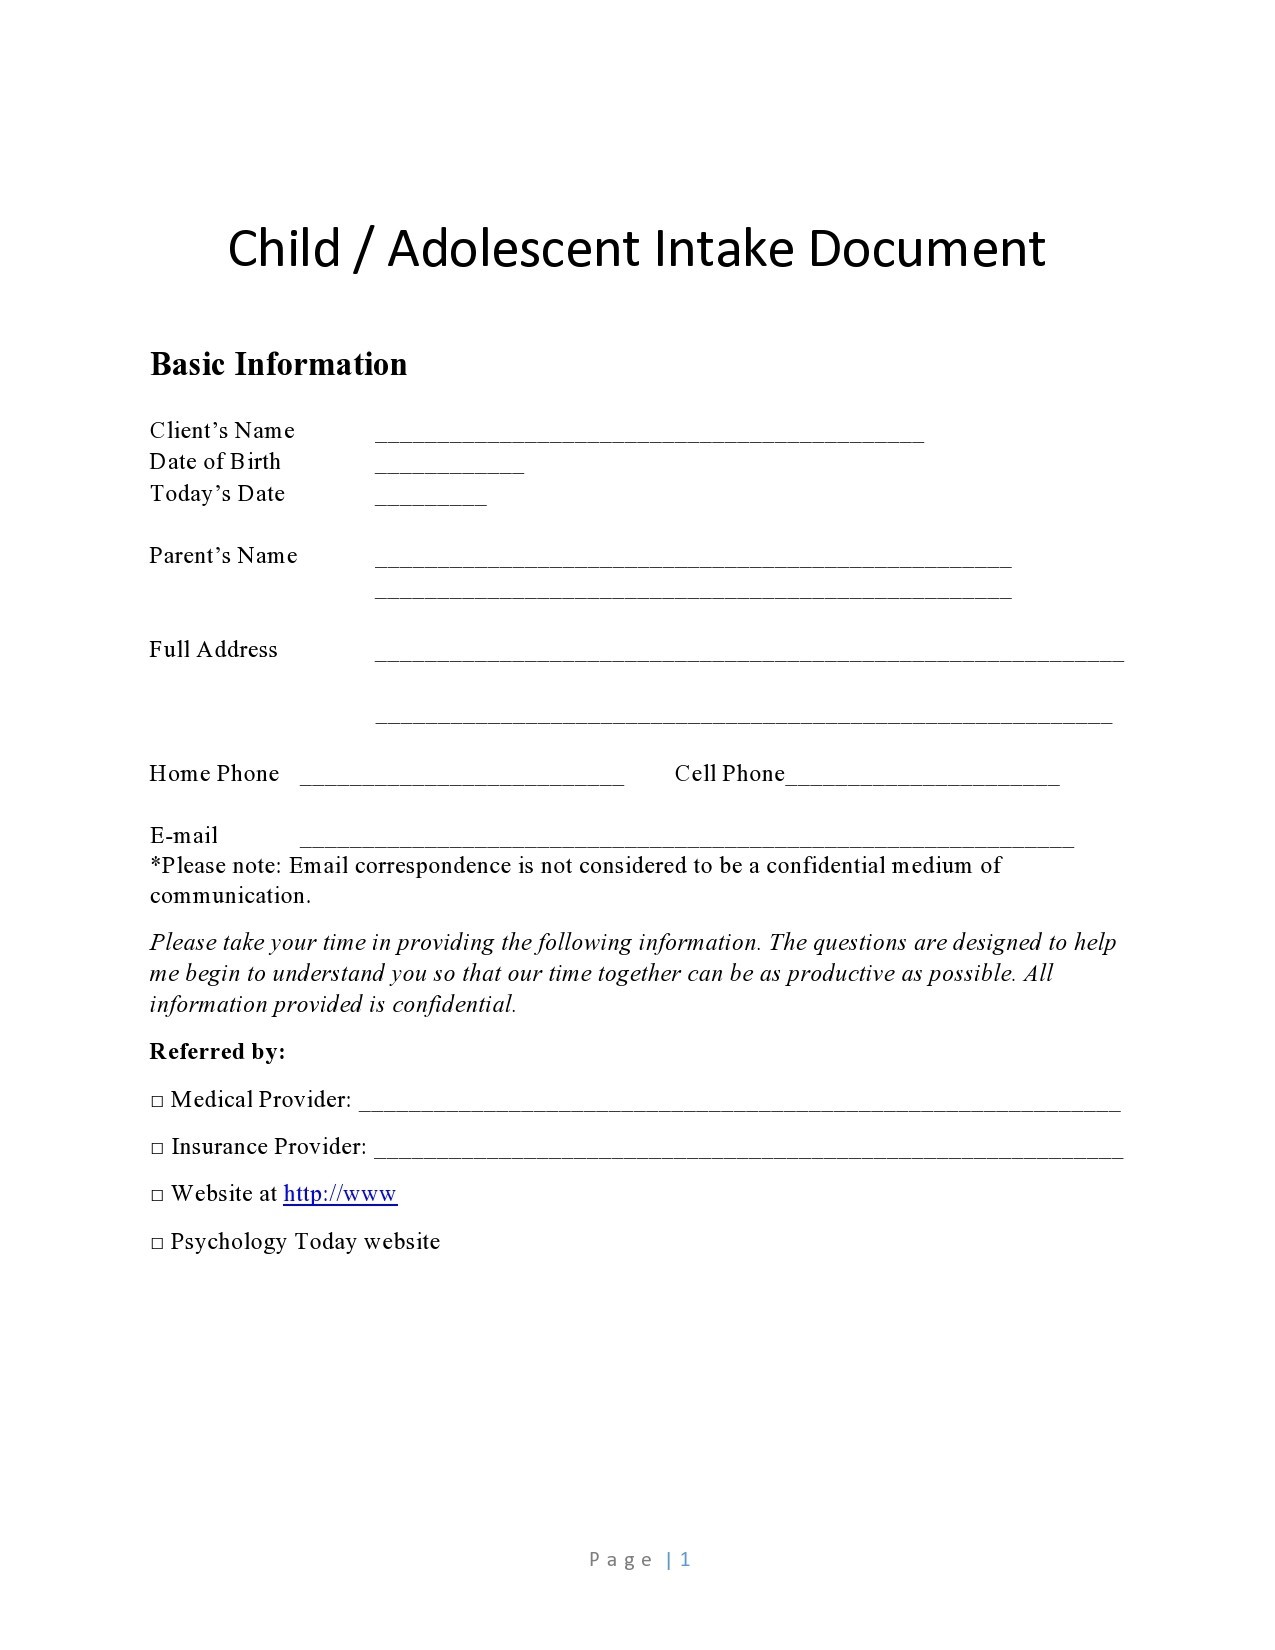 Free client intake form 28